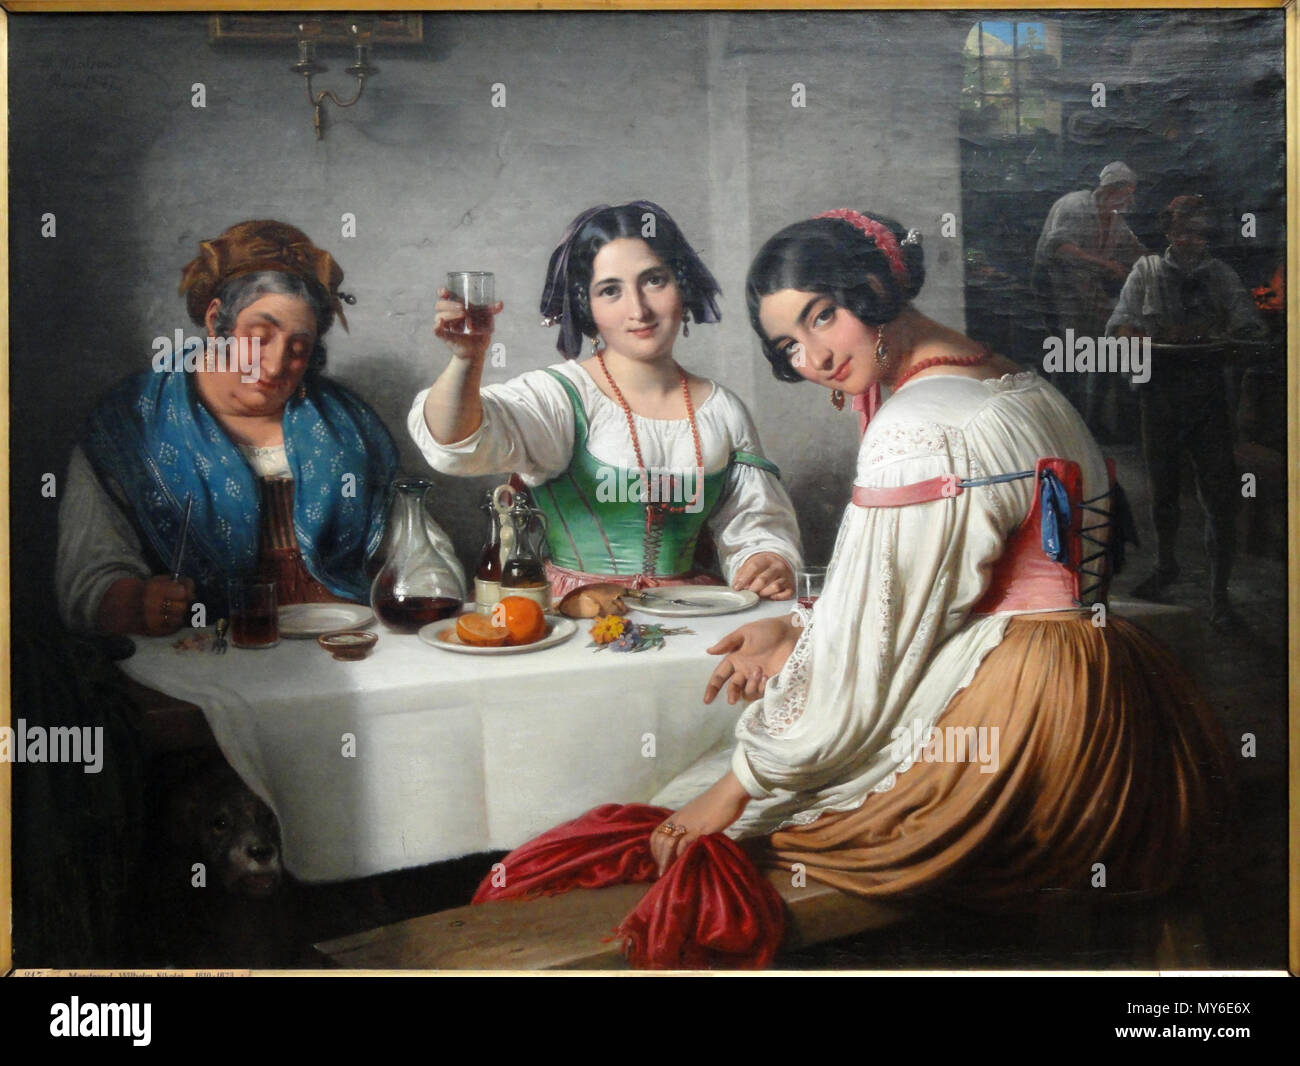 . Italian Osteria Scene, Girl welcoming a Person entering . Painting exhibited in the Ny Carlsberg Glyptotek, Dantes Plads 7, Copenhagen, Denmark. This artwork is now in the public domain because the artist died more than 70 years ago. 1847 ; 2012-05-12 08:21:43. Daderot 261 Italian Osteria Scene, Girl welcoming a Person entering, by Wilhelm Marstrand - Ny Carlsberg Glyptotek - Copenhagen - DSC09271 Stock Photo